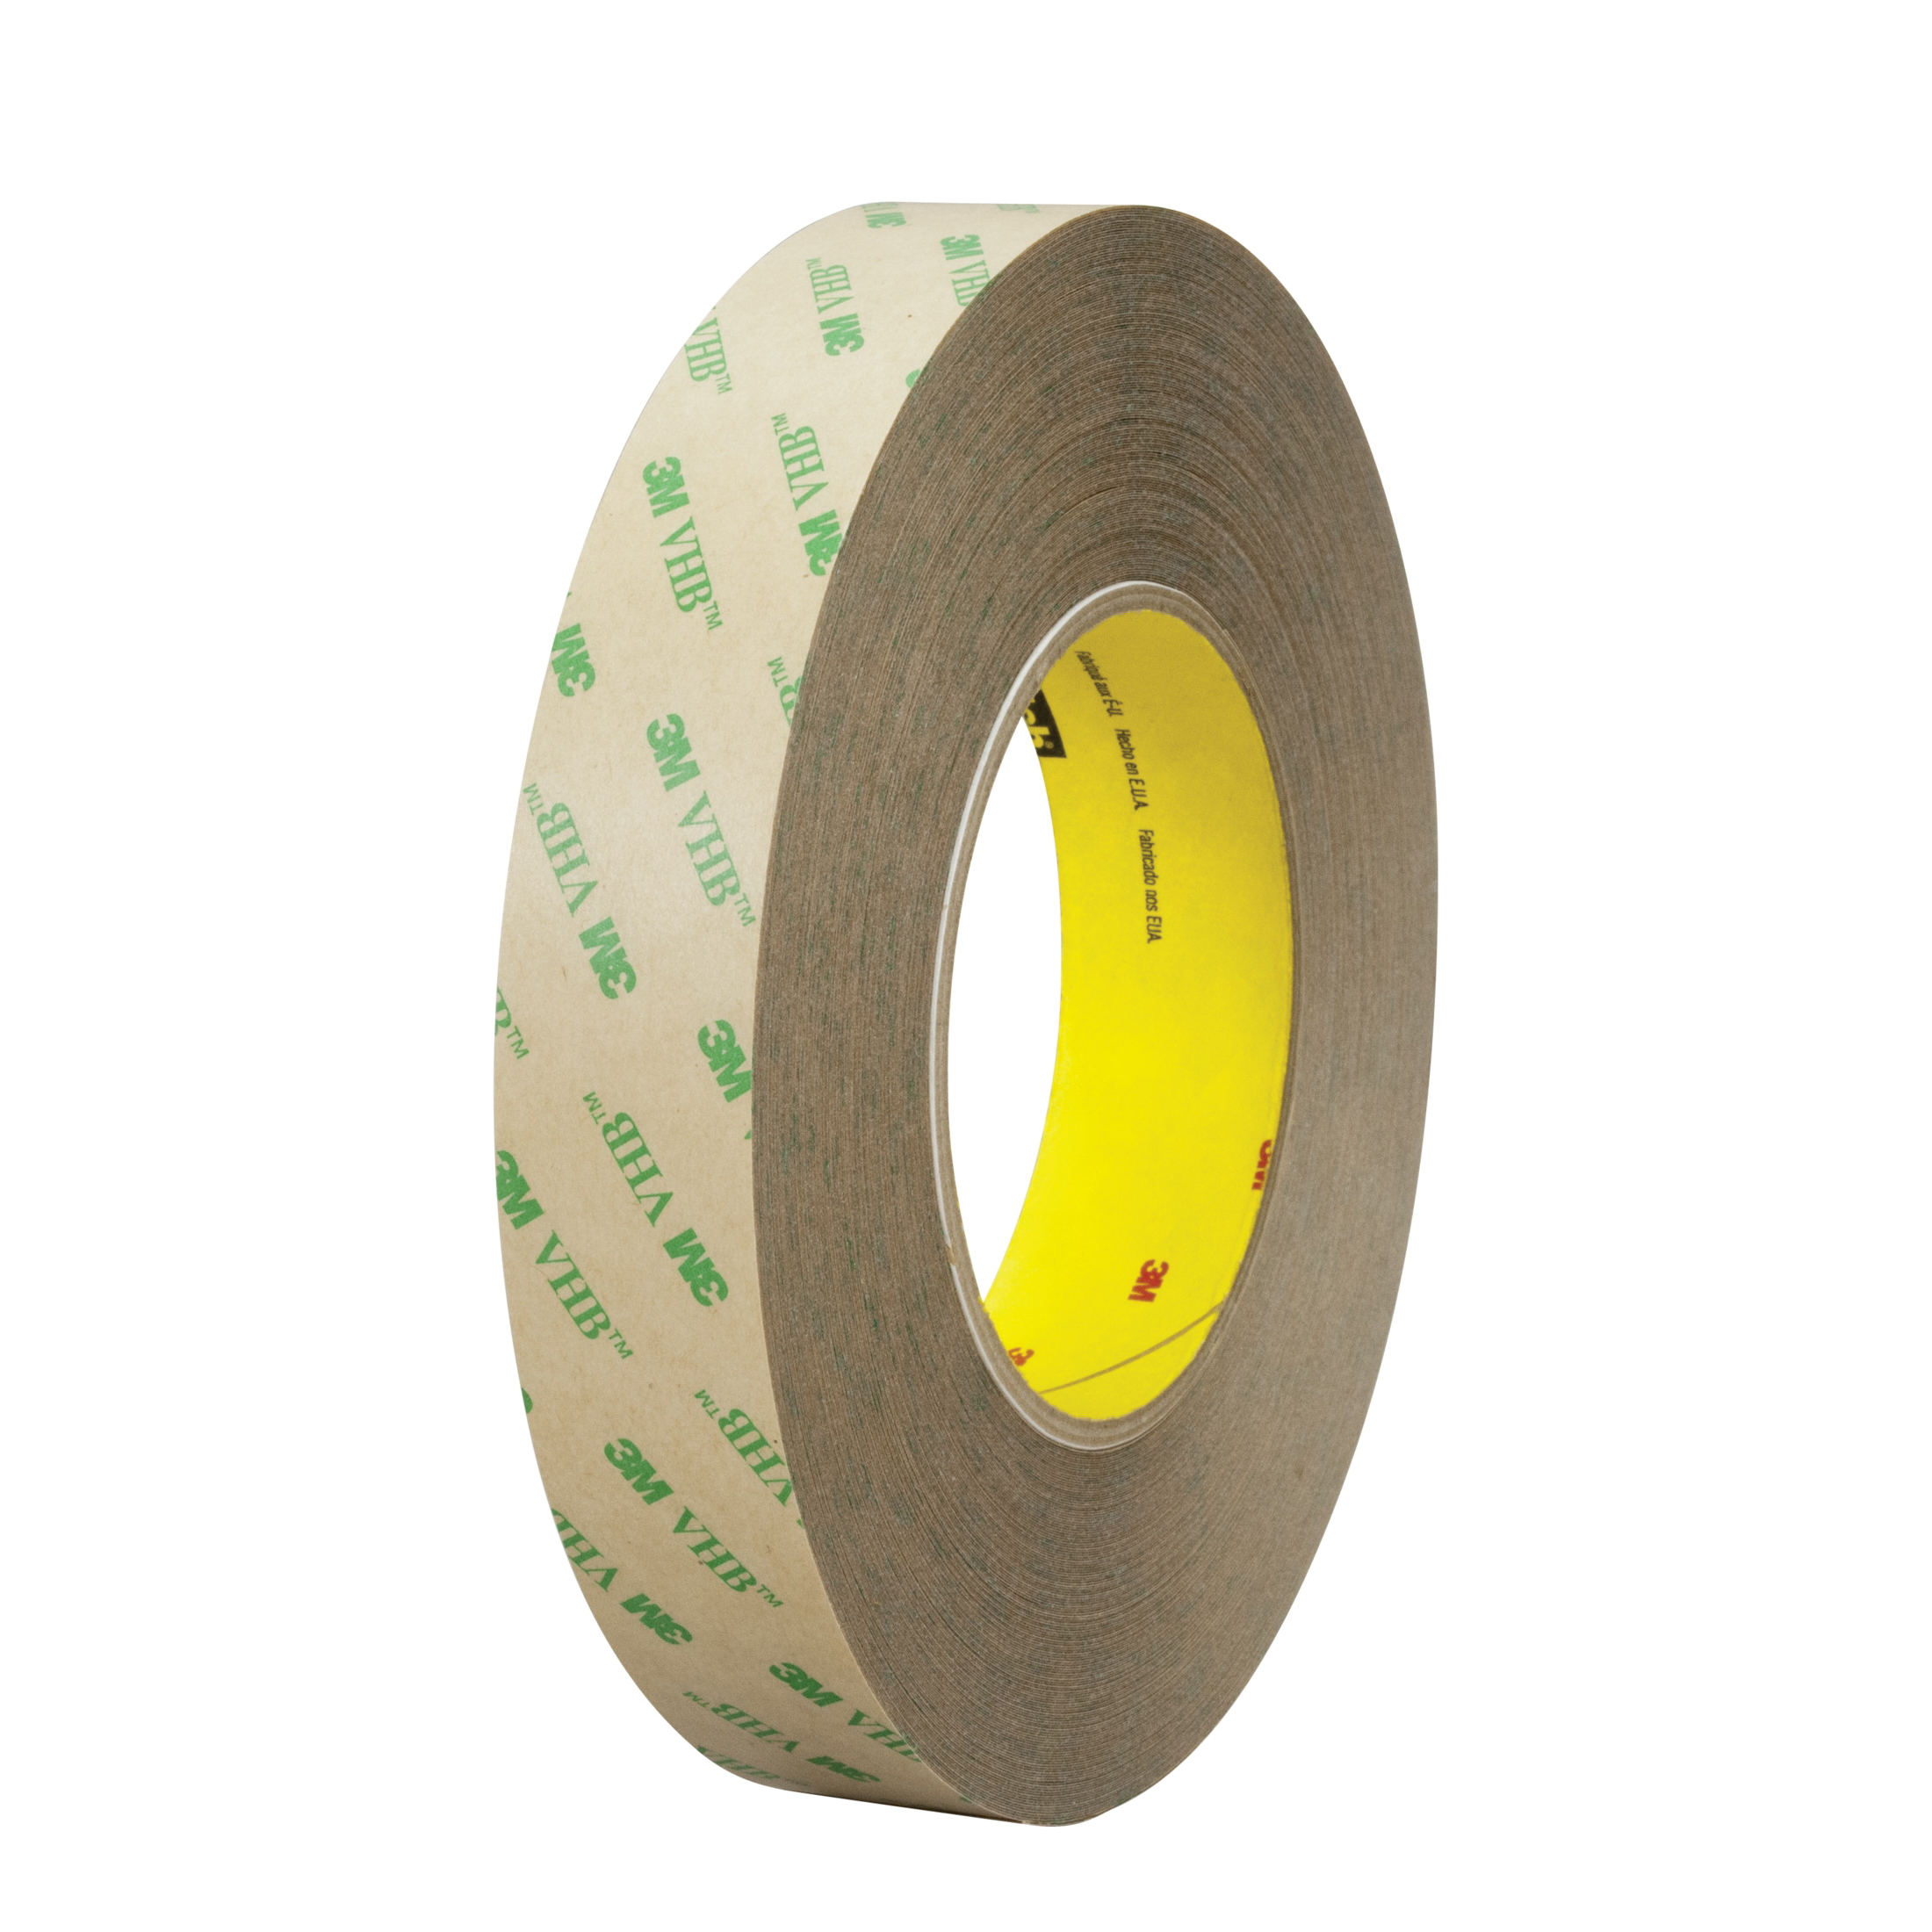 3M™ VHB™ 021200-13977 High Performance Low Tack Adhesive Transfer Tape, 60 yd L x 1/2 in W, 9.2 mil THK, 5 mil 100MP Acrylic Adhesive, Clear